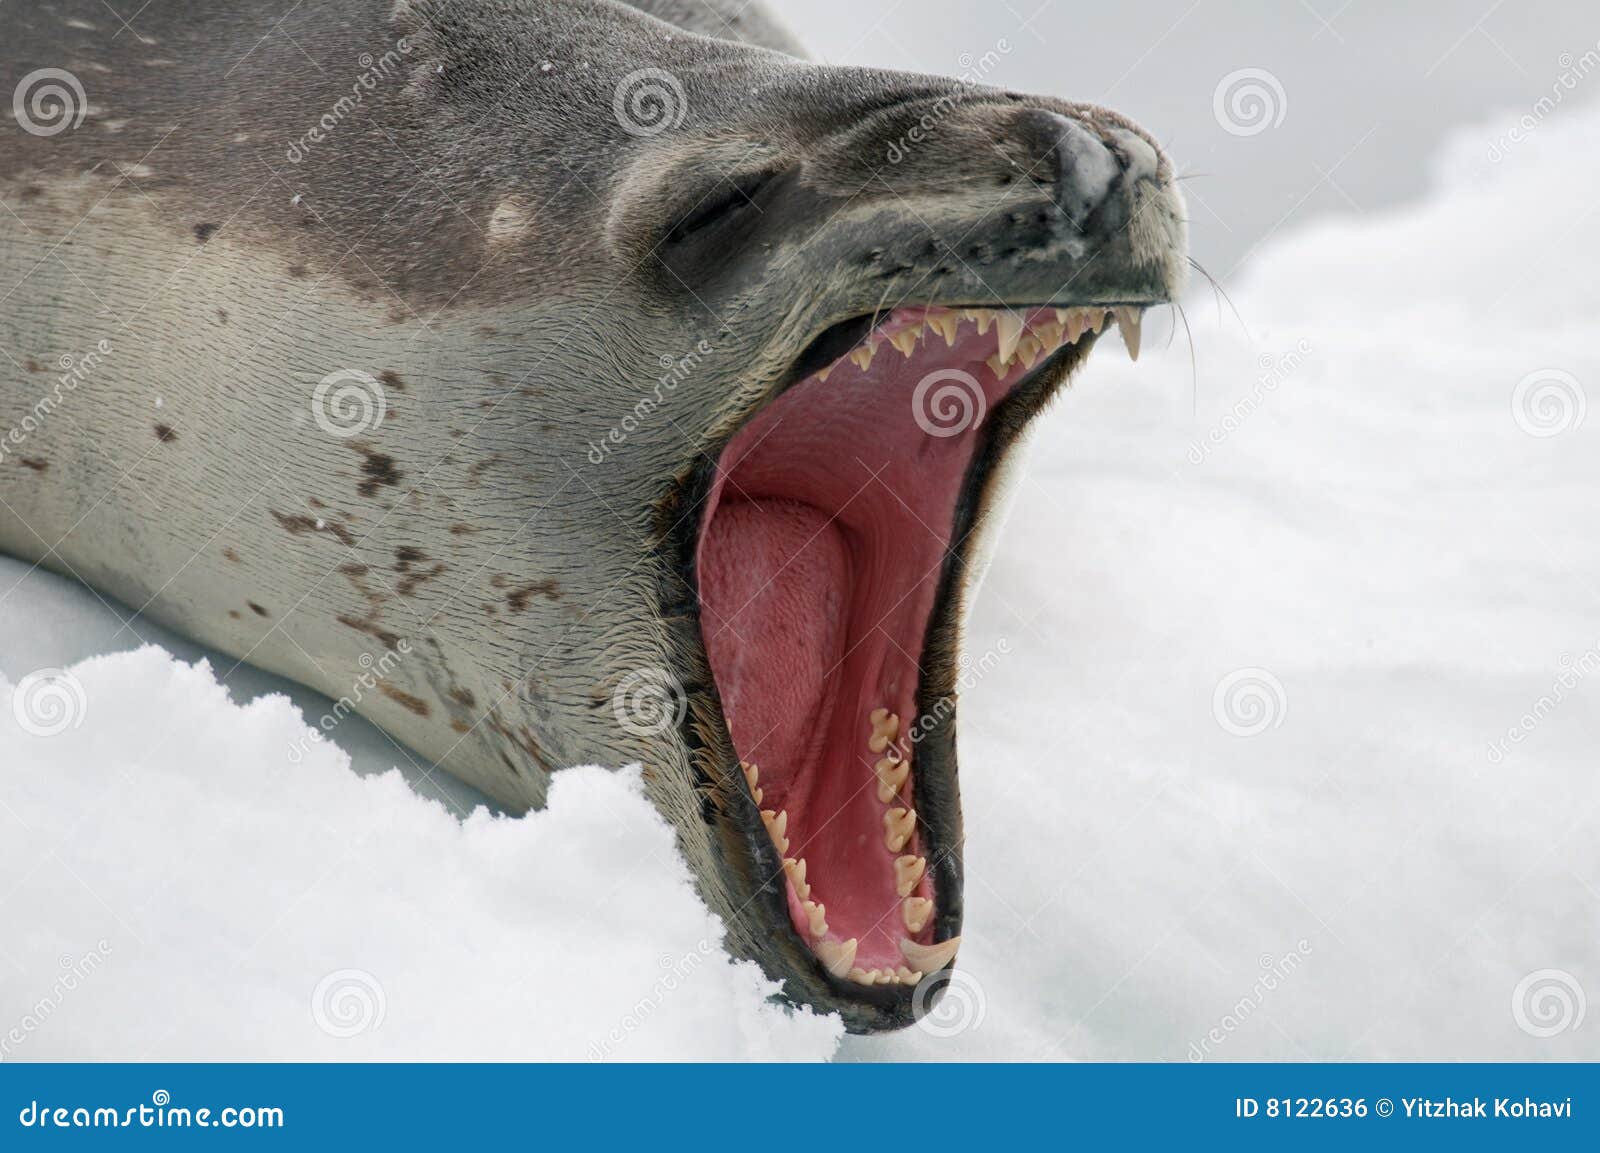 leopard seal showing off